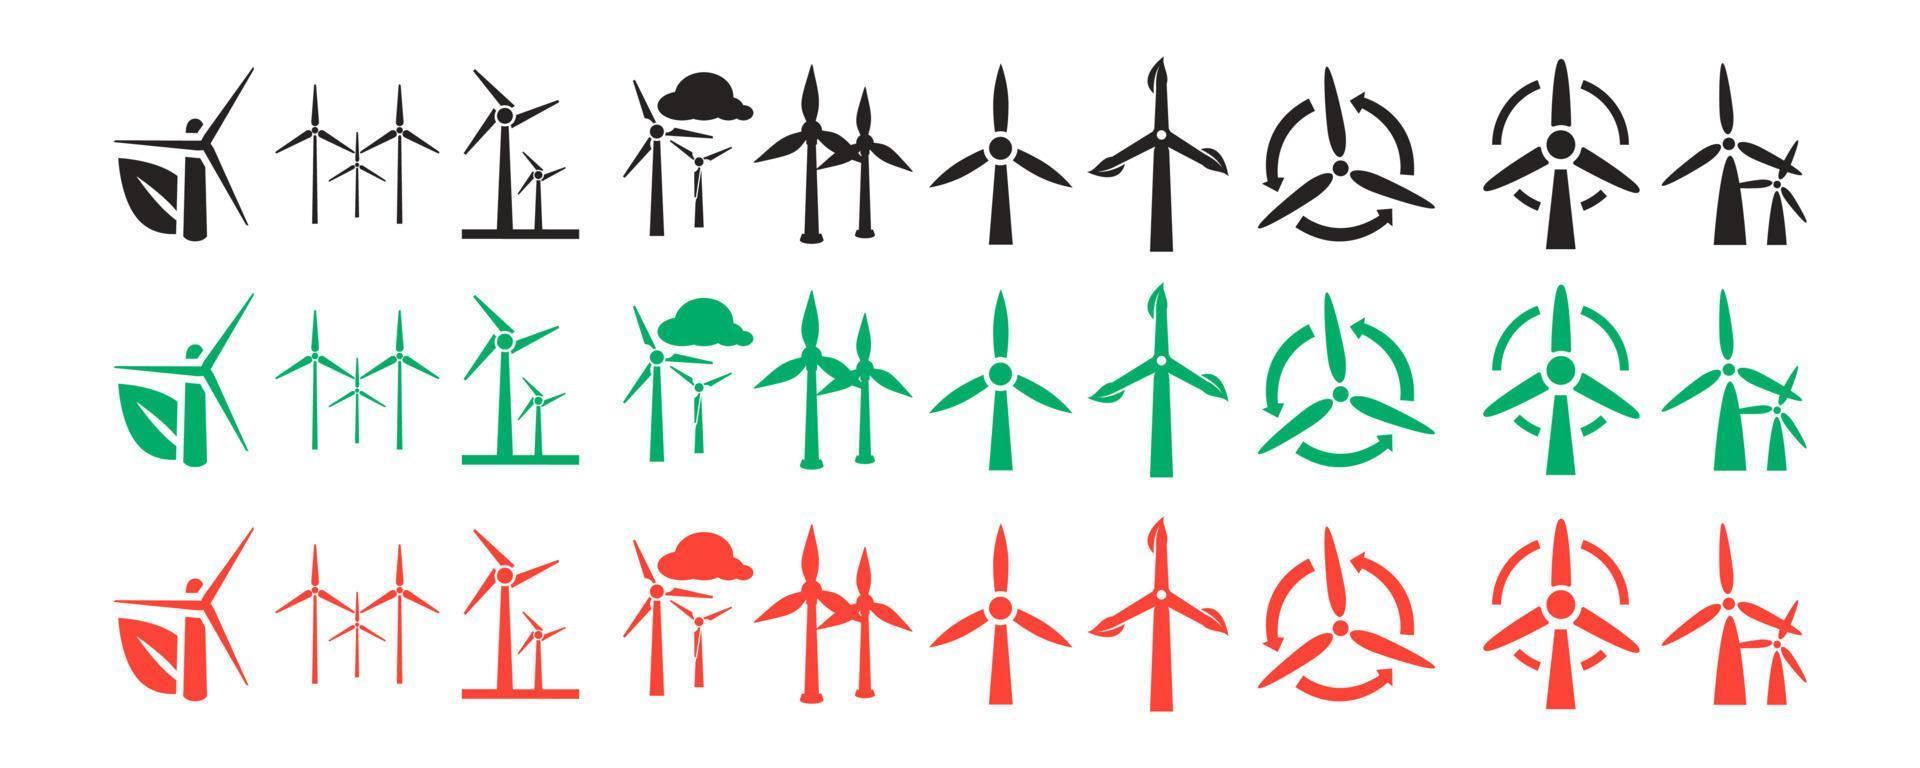 wind power Icon on the white background. vector